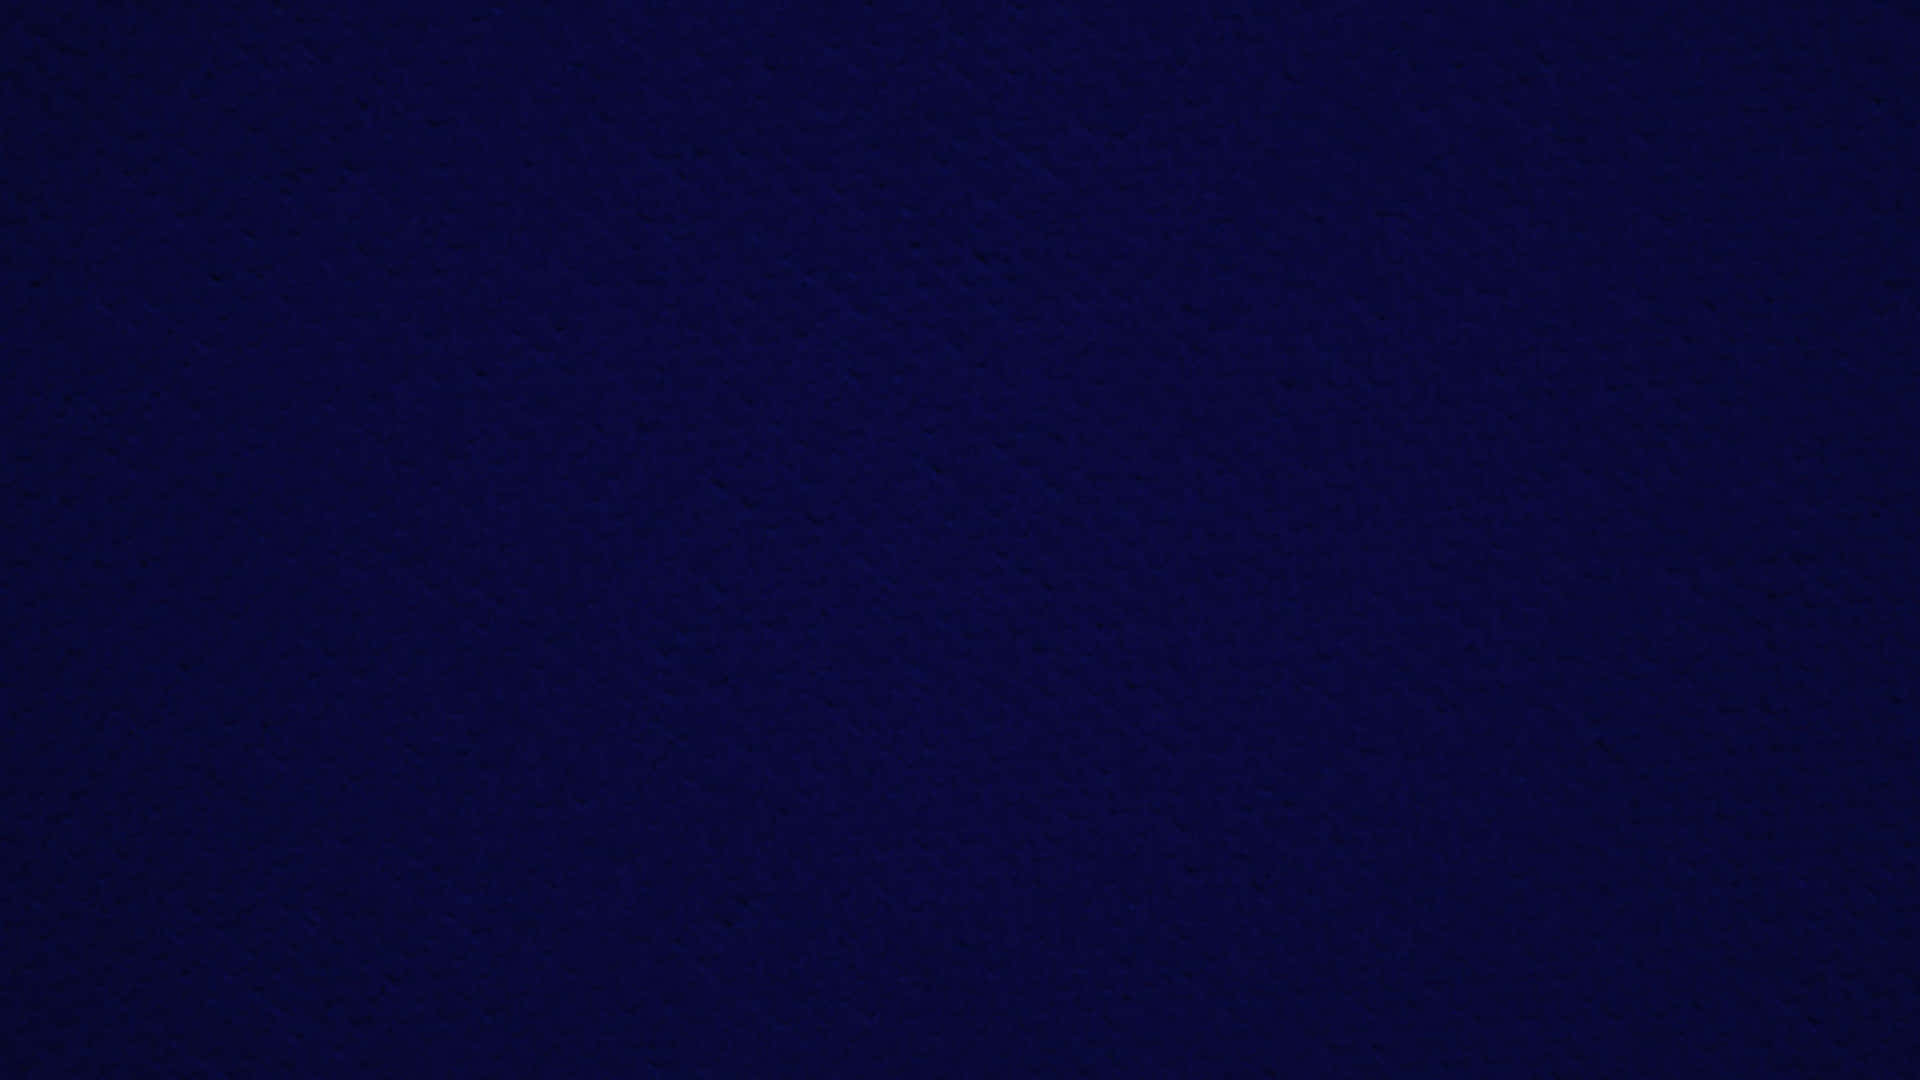 Dark And Solid Navy Blue Background